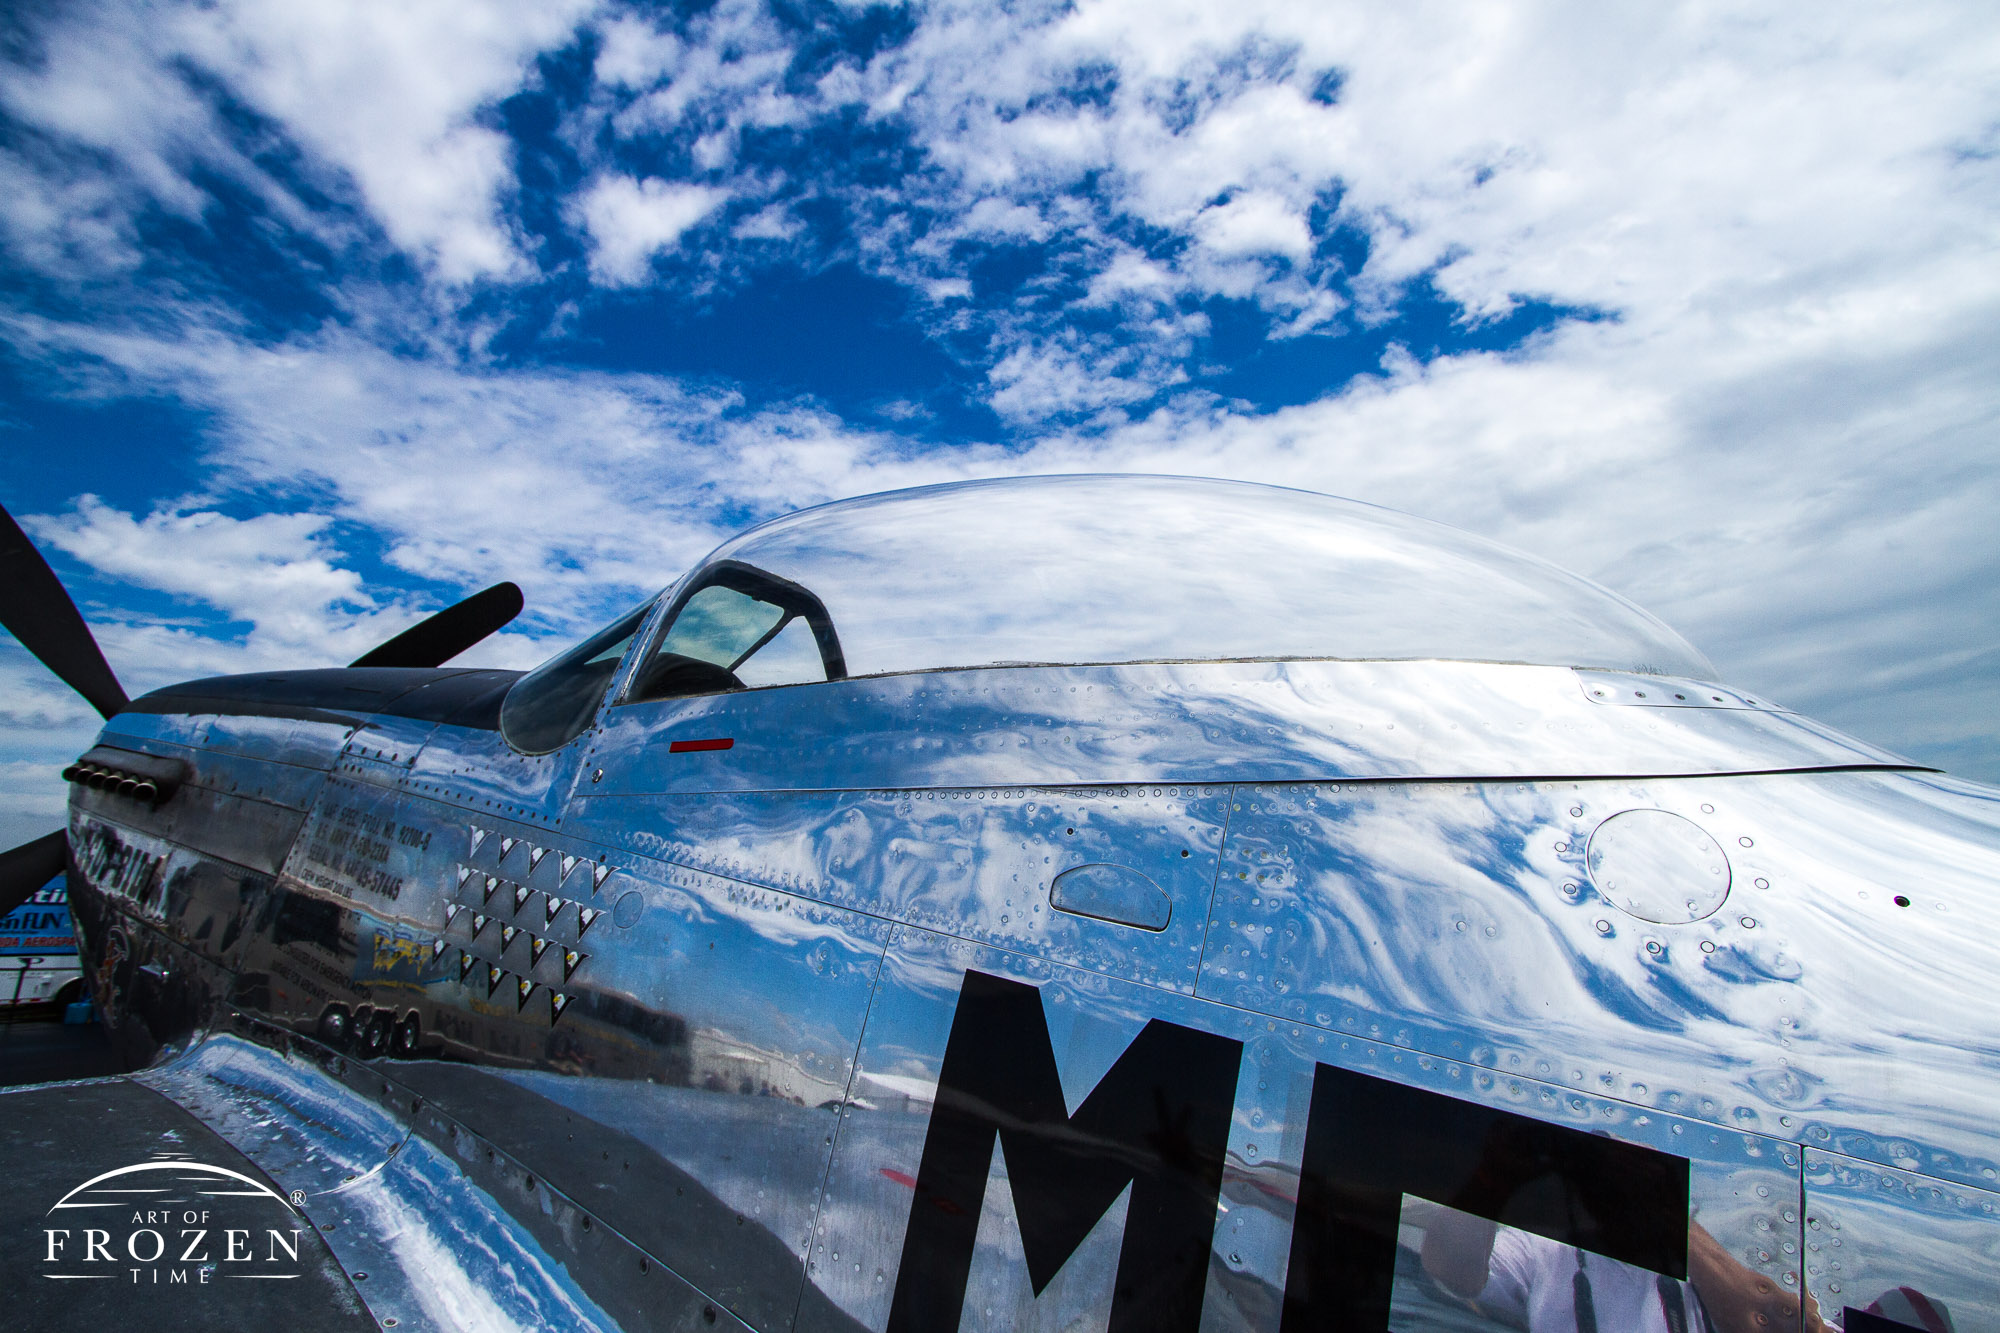 A cropped image of a P-51 Mustang fuselage where the highly polished finish reflects the partly cloudy sky above.